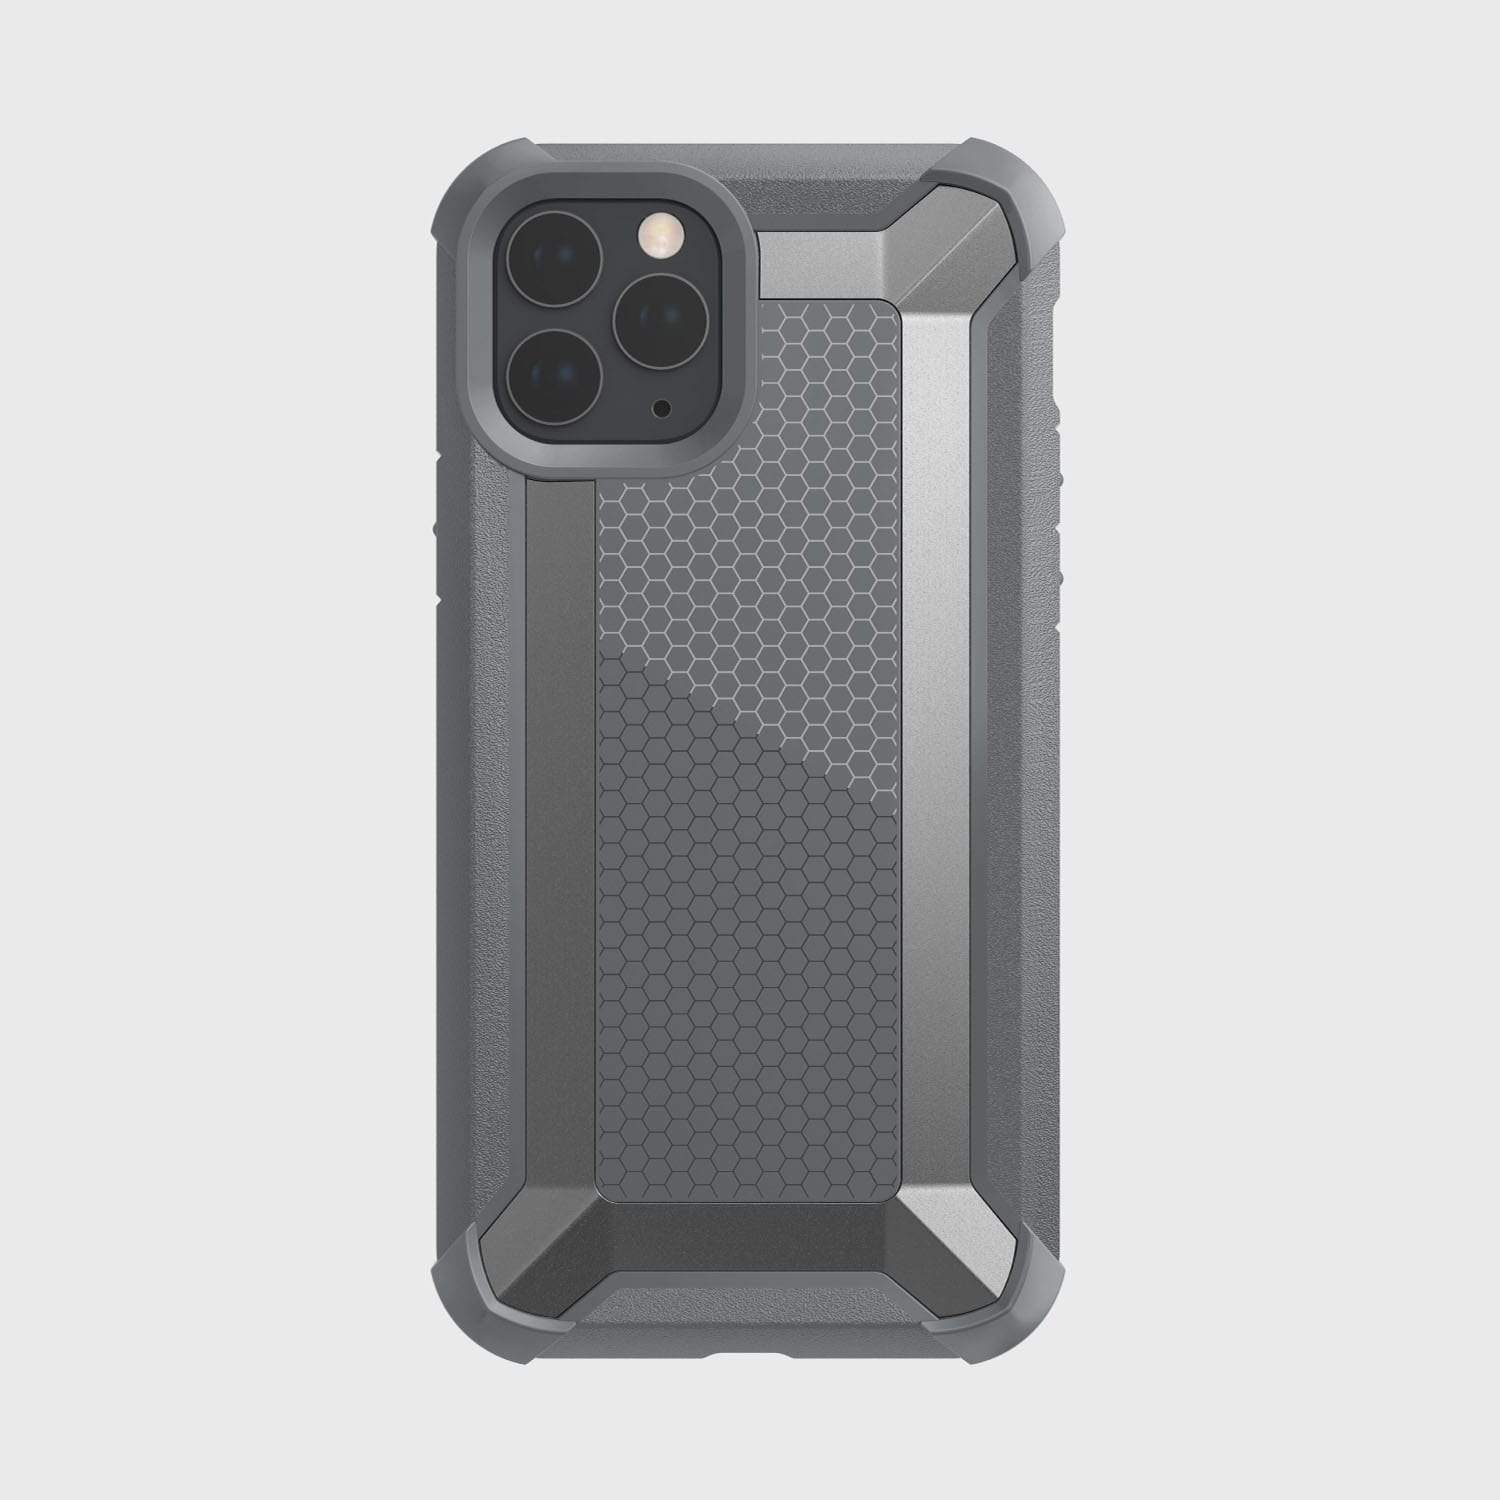 The iPhone 11 Pro Max Case - TACTICAL by Raptic, featuring shock-absorbing rubber exterior and Military Standard MIL-STD-810G compliance, comes in grey color.